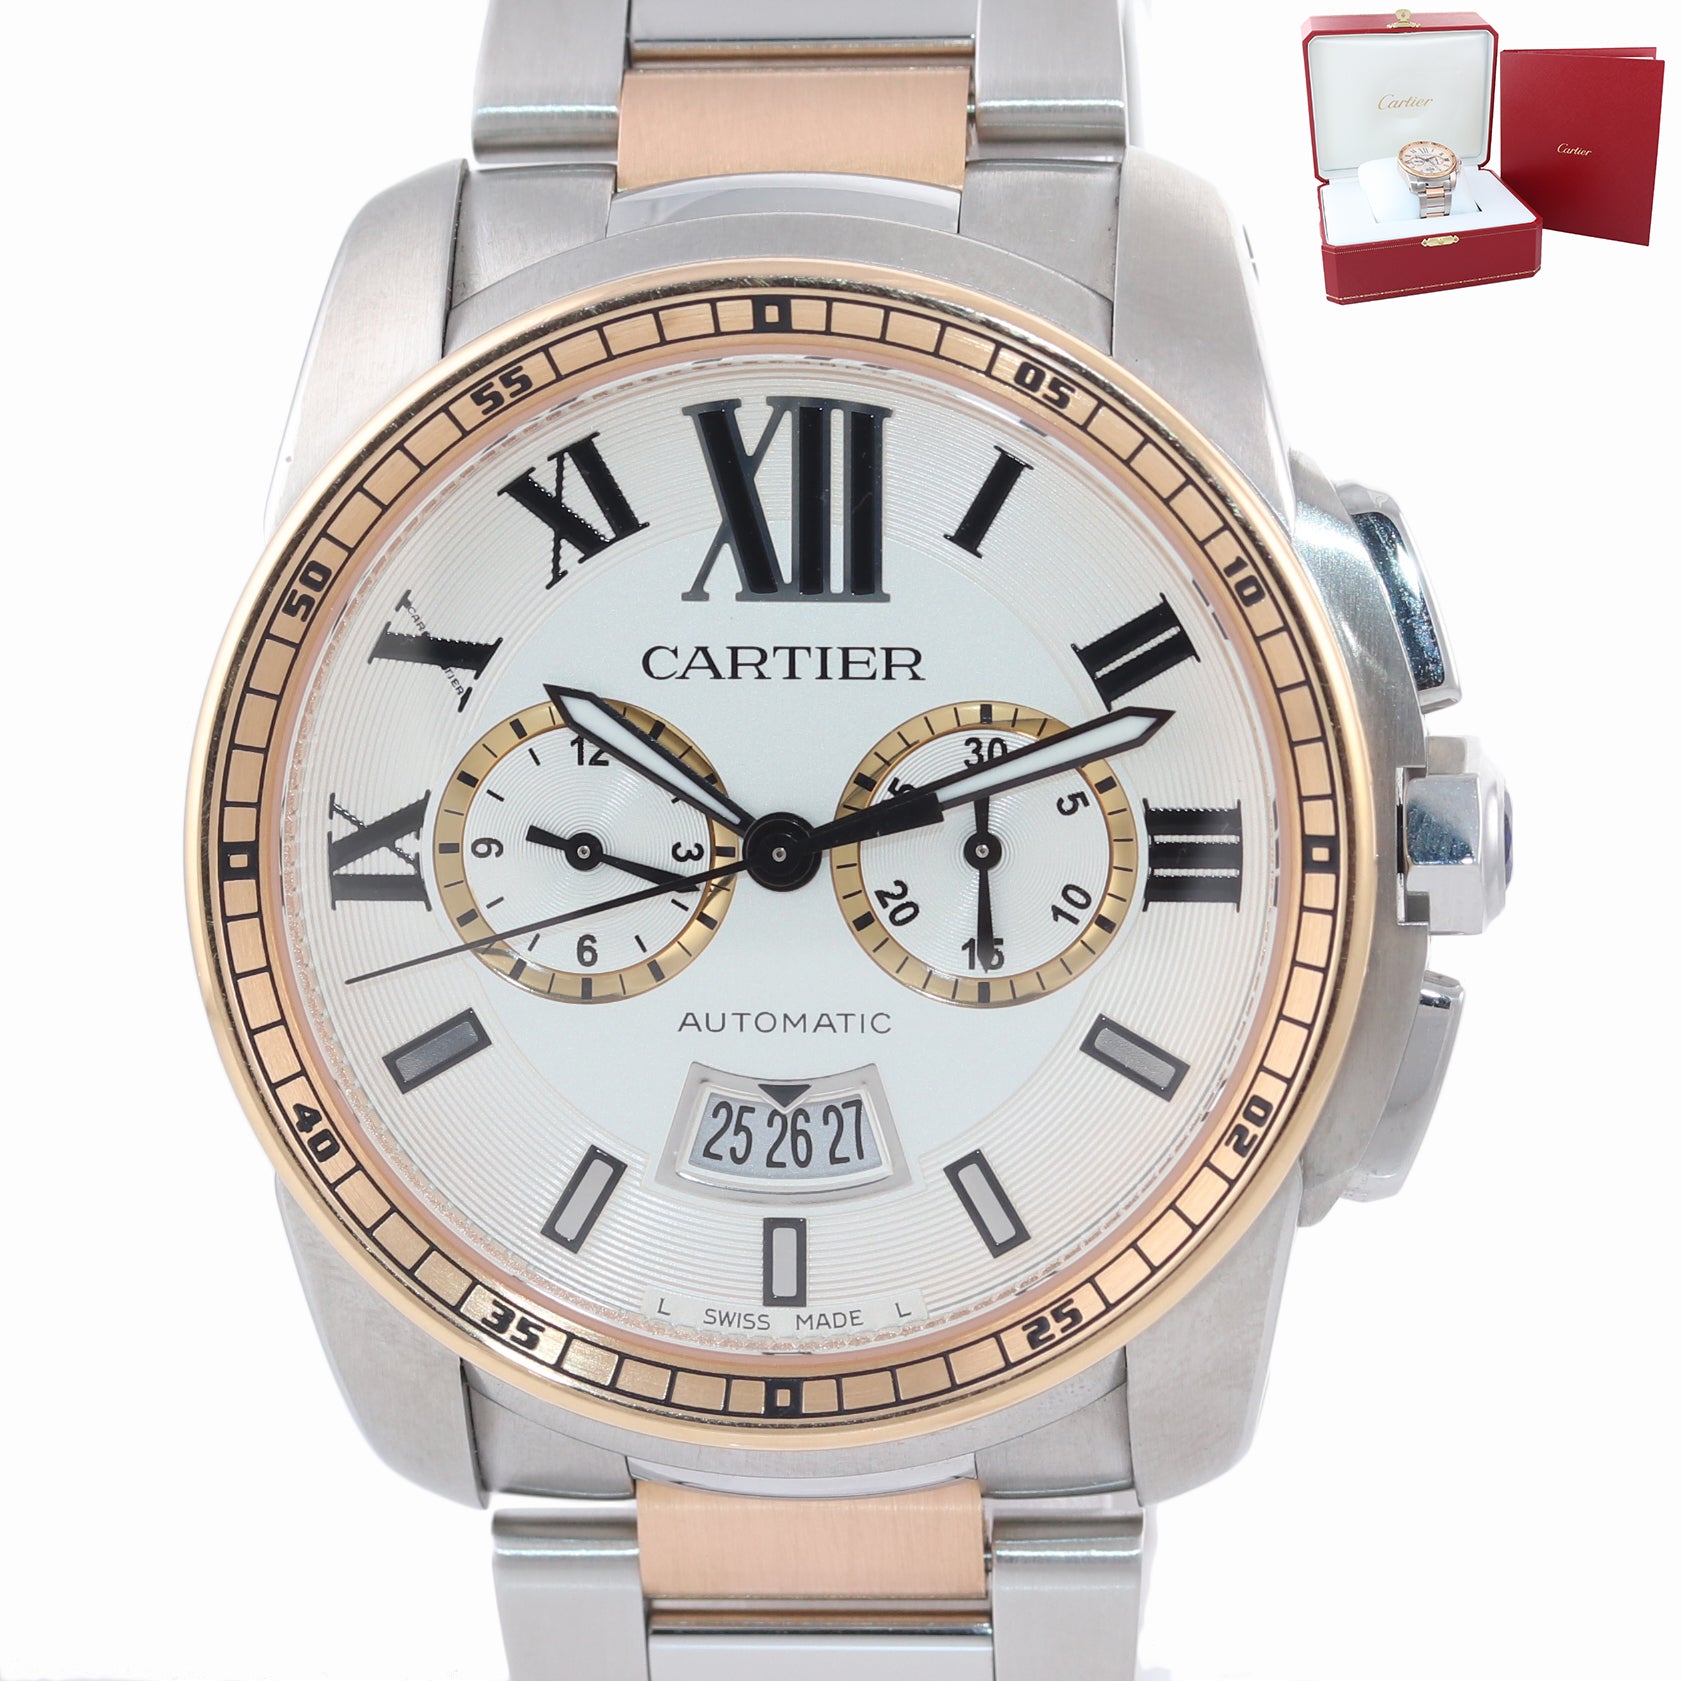 2017 PAPERS Cartier Calibre 3578 Chronograph 18K Rose Two Tone W7100042 Watch